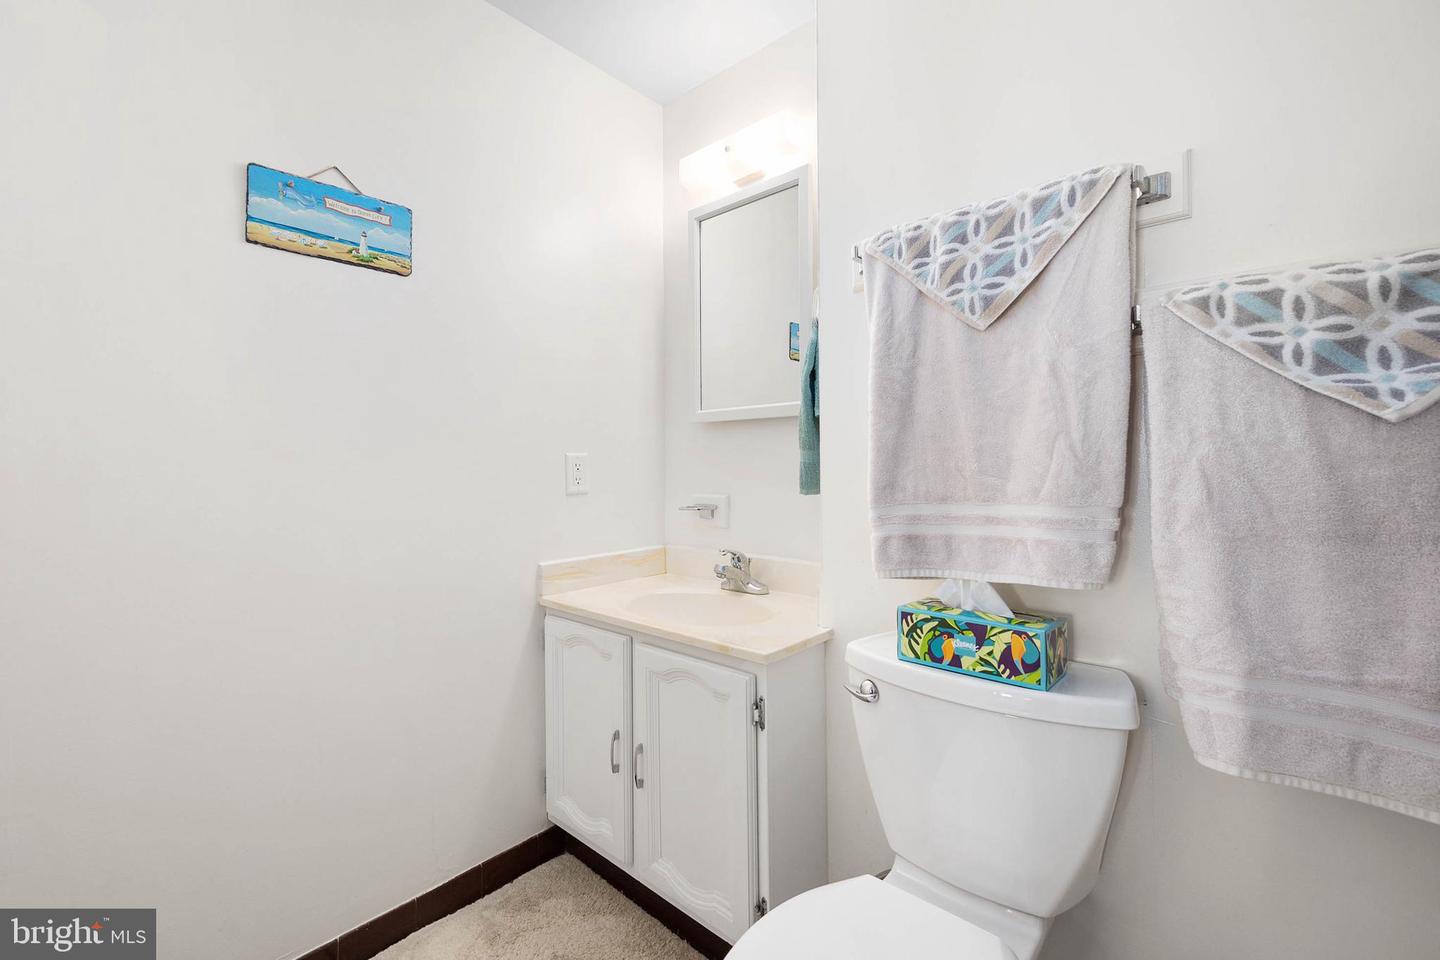 MDWO2016838-802664774726-2024-03-30-09-29-17 107 Convention Center Dr #101b | Ocean City, MD Real Estate For Sale | MLS# Mdwo2016838  - 1st Choice Properties